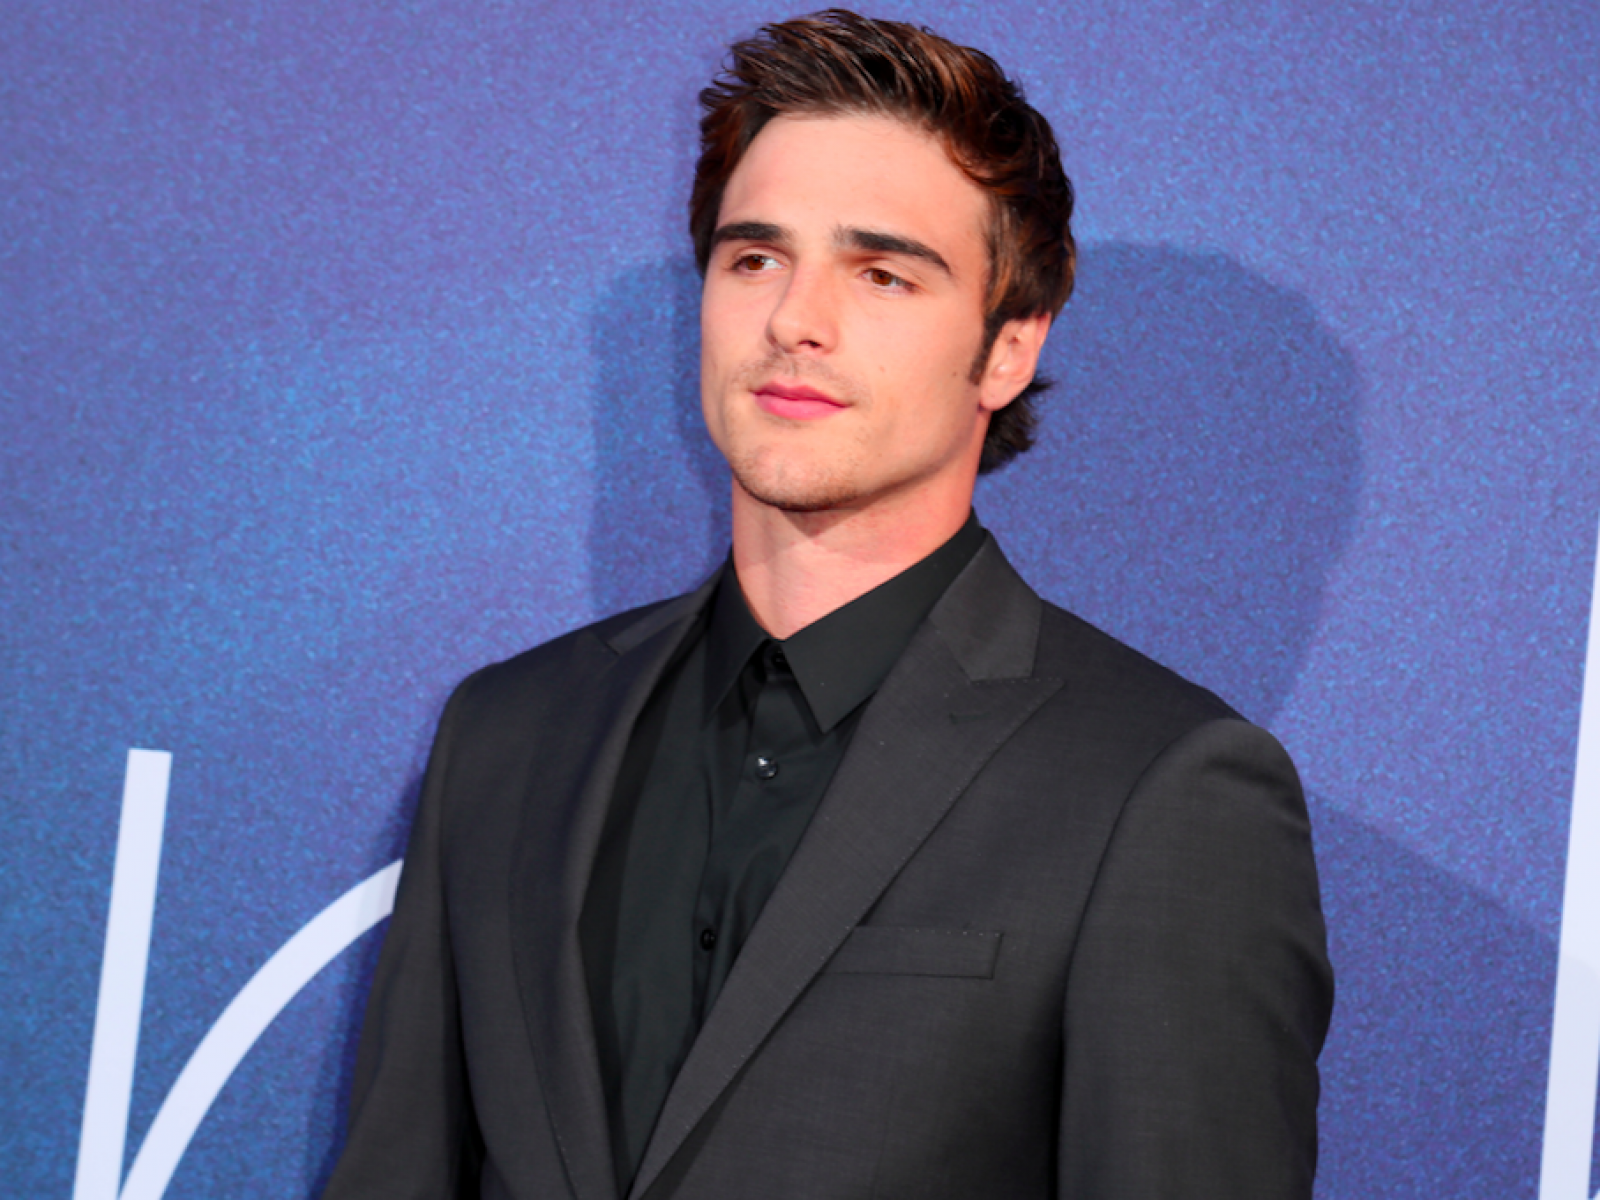 Euphoria' Star Jacob Elordi Deserves an Emmy for Performance in Finale, Twitter Users Say